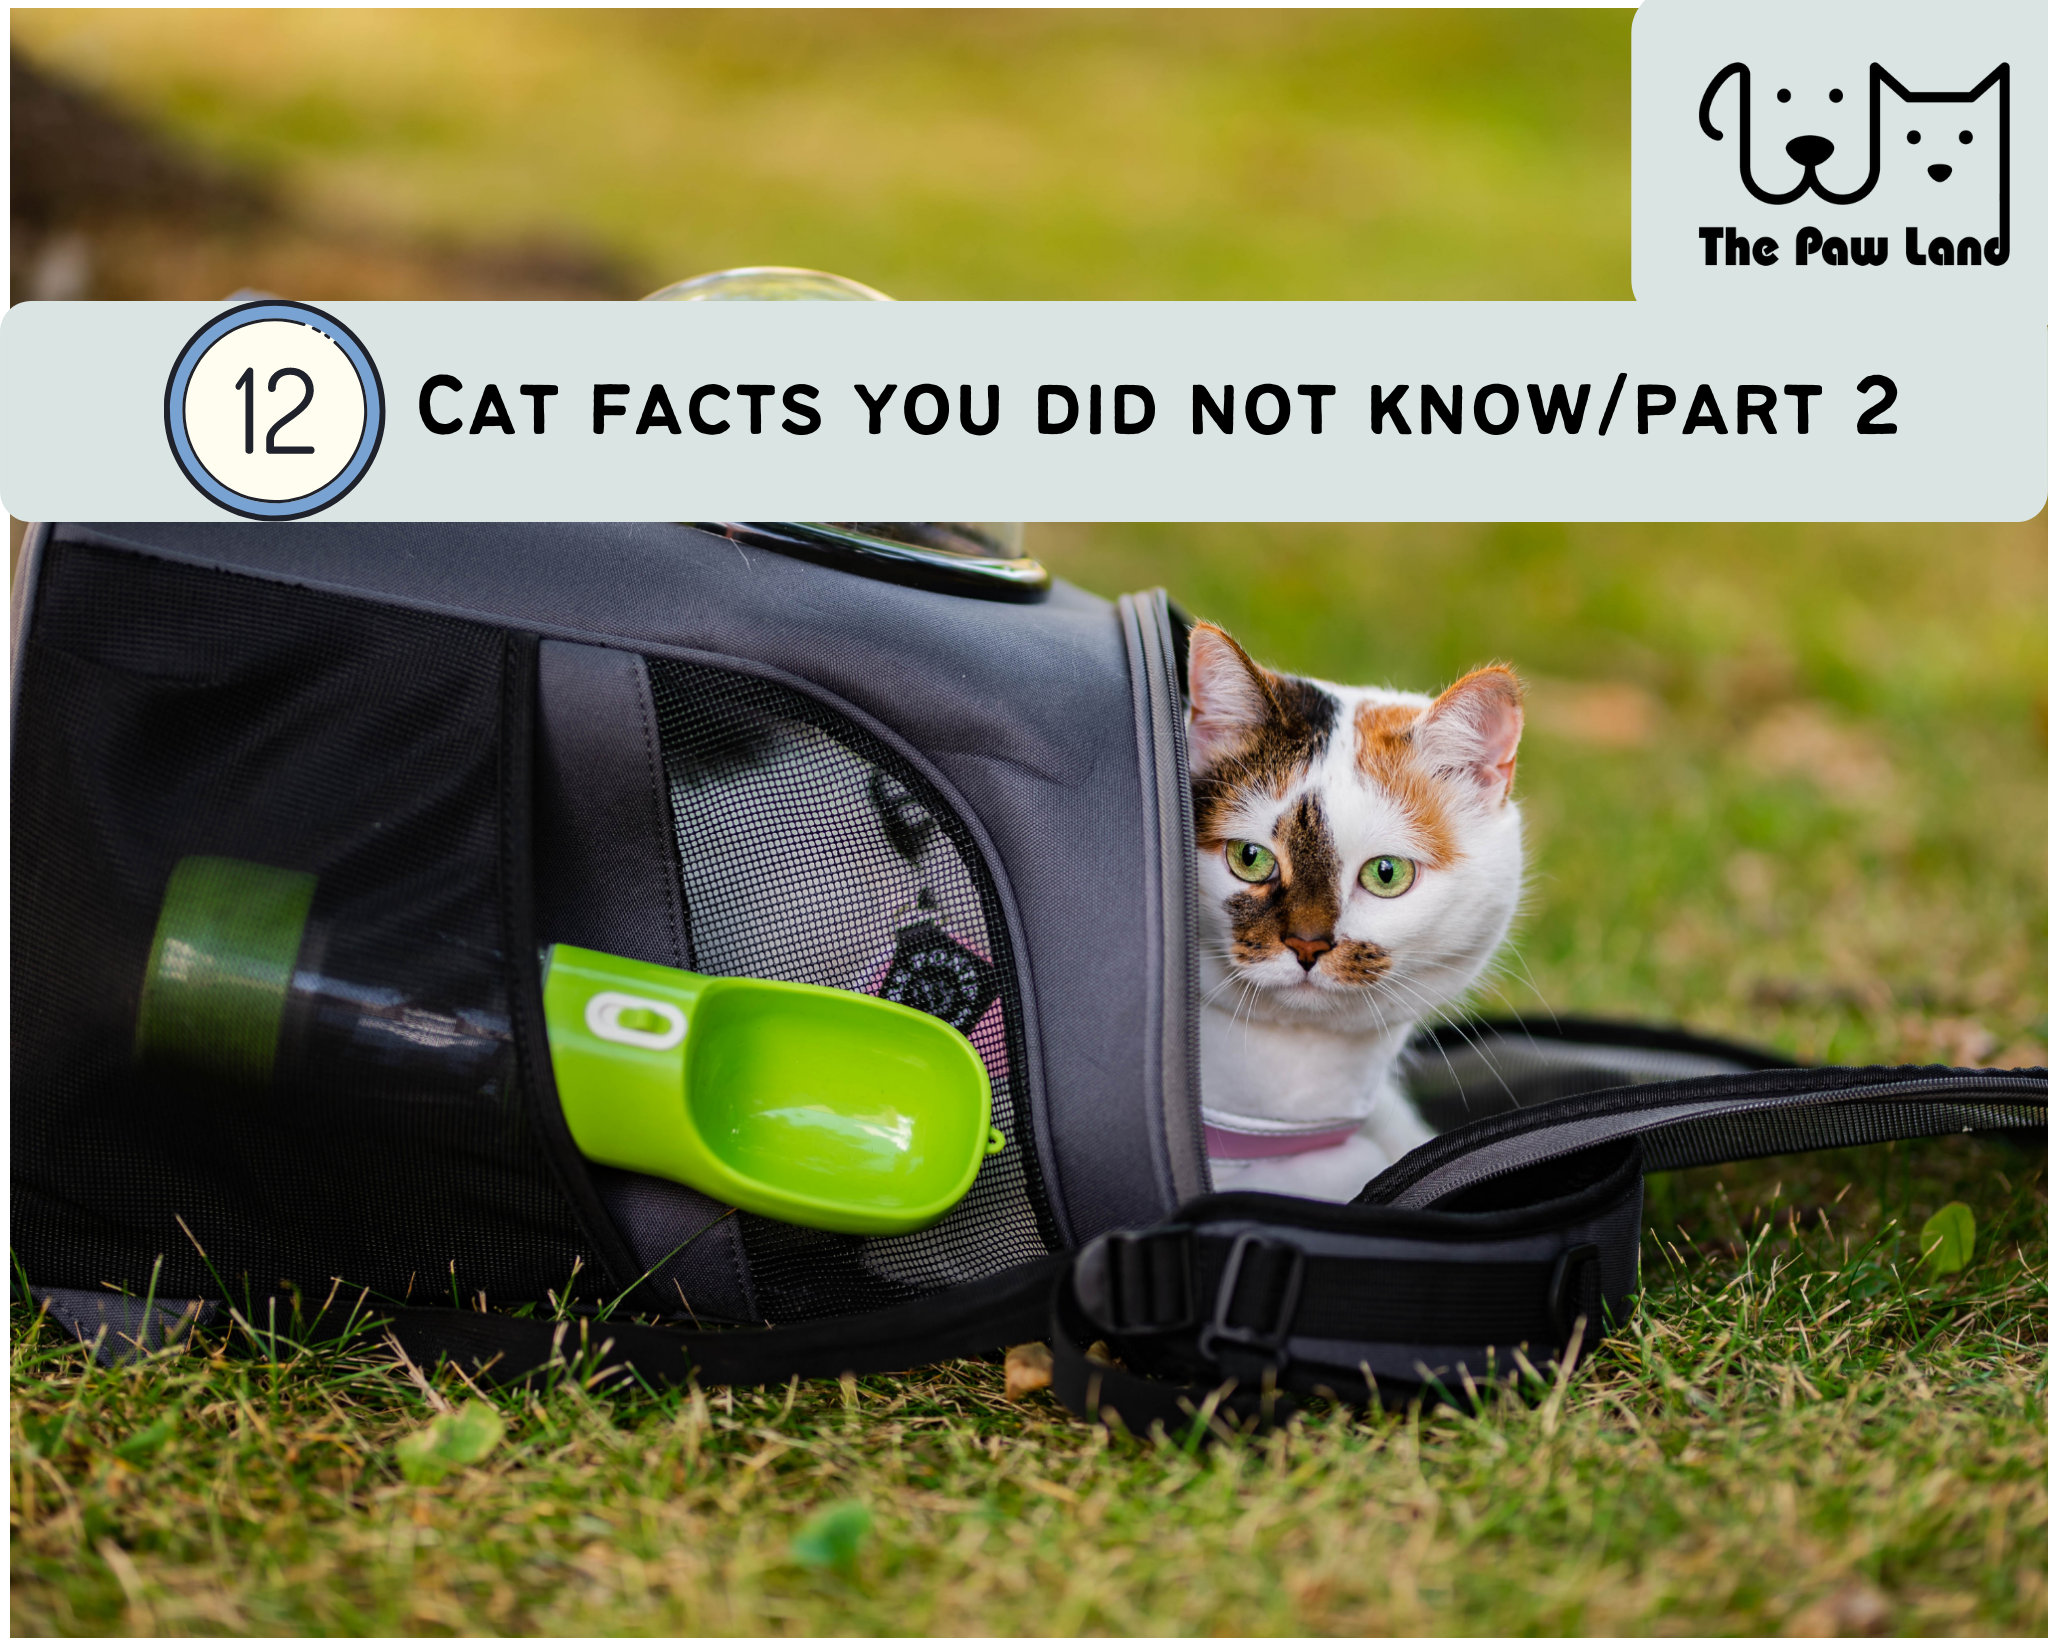 Cat Facts You Did Not Know.!! Part 2